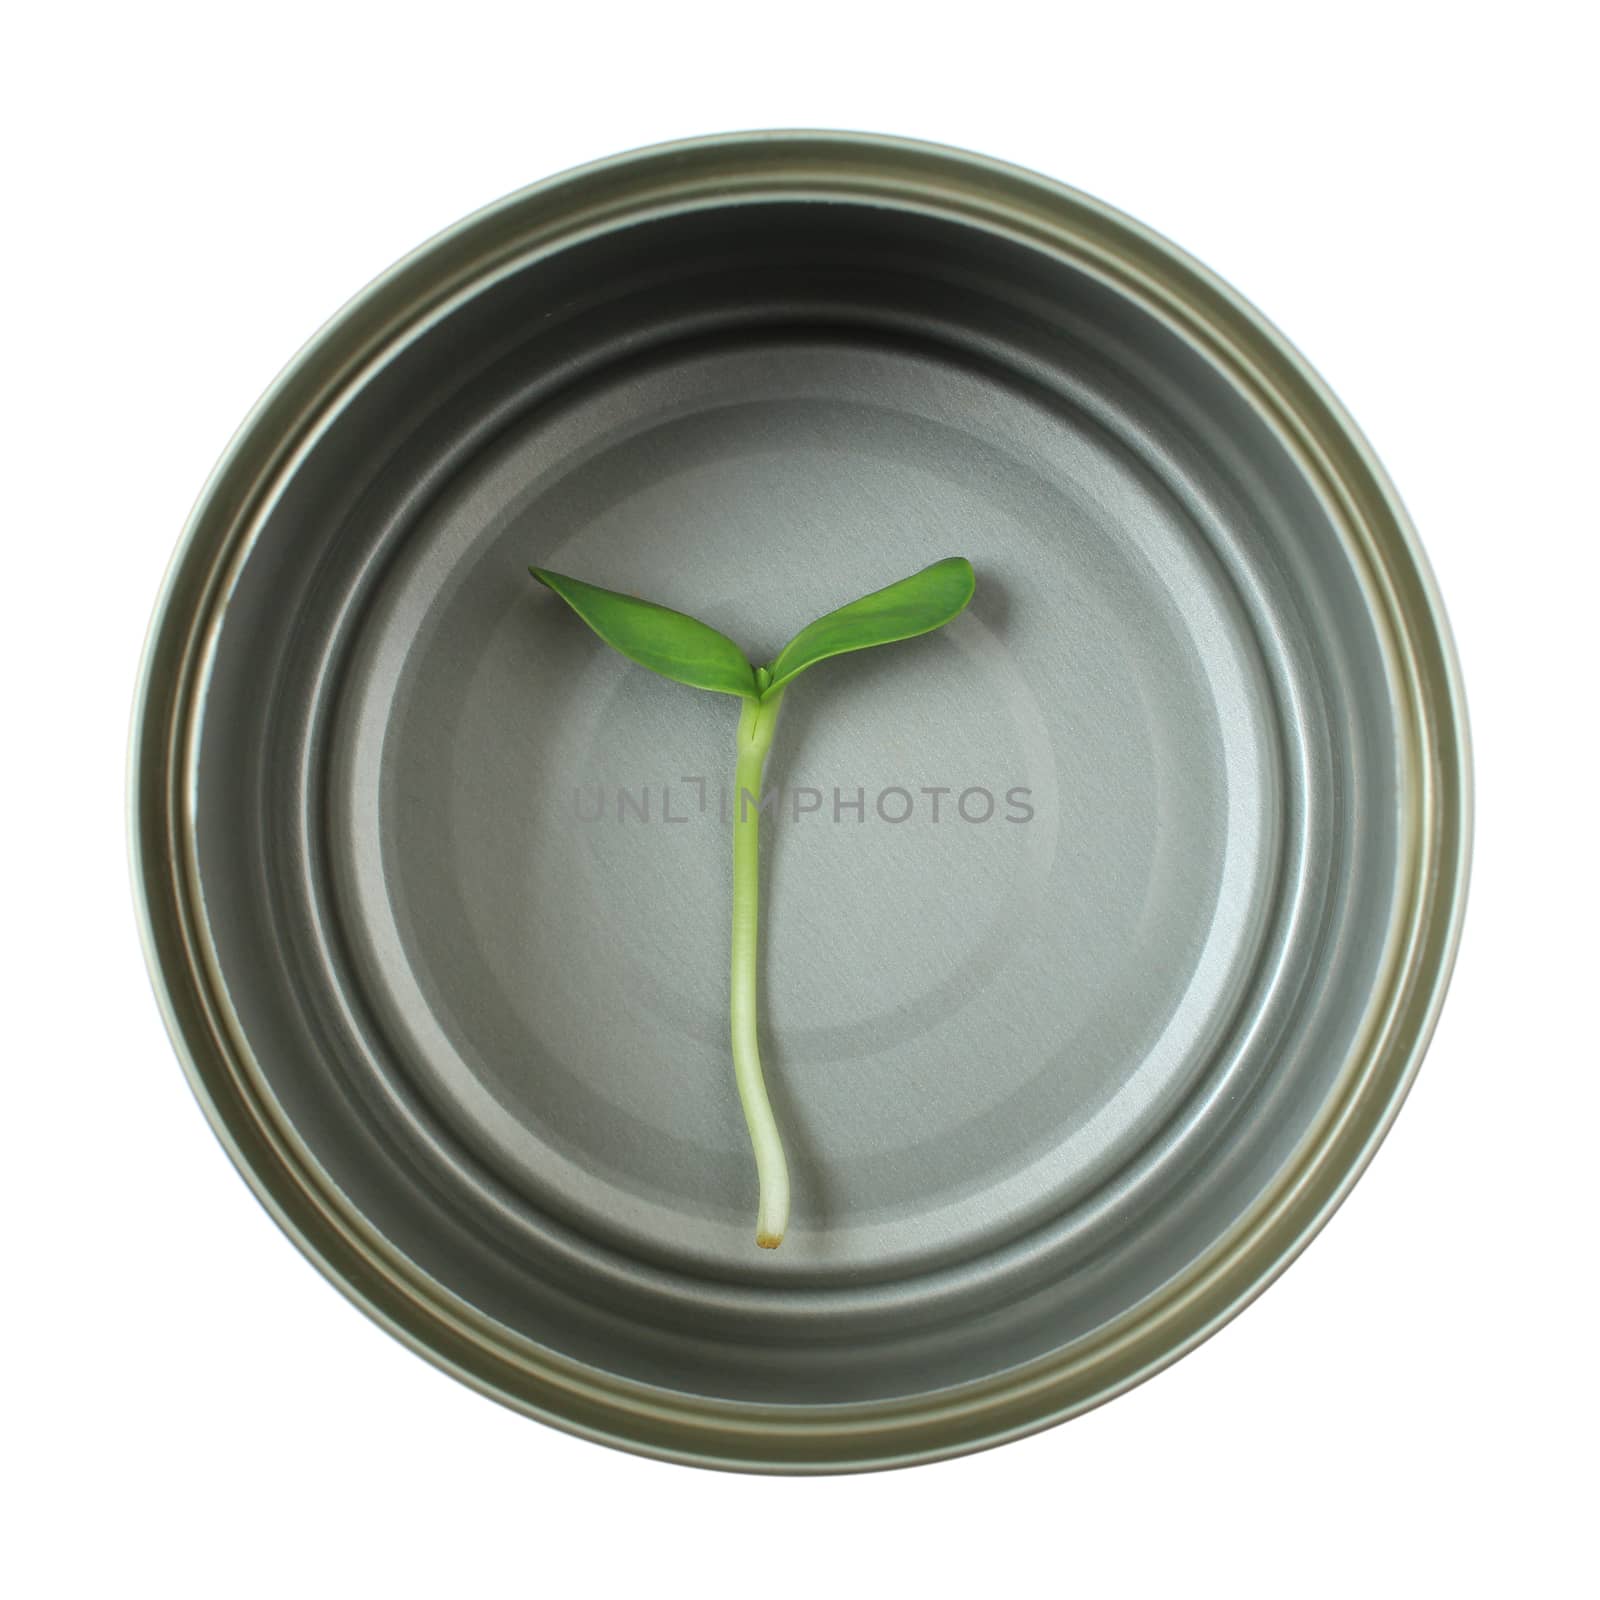 Organic green young sunflower sprout in cans by foto76